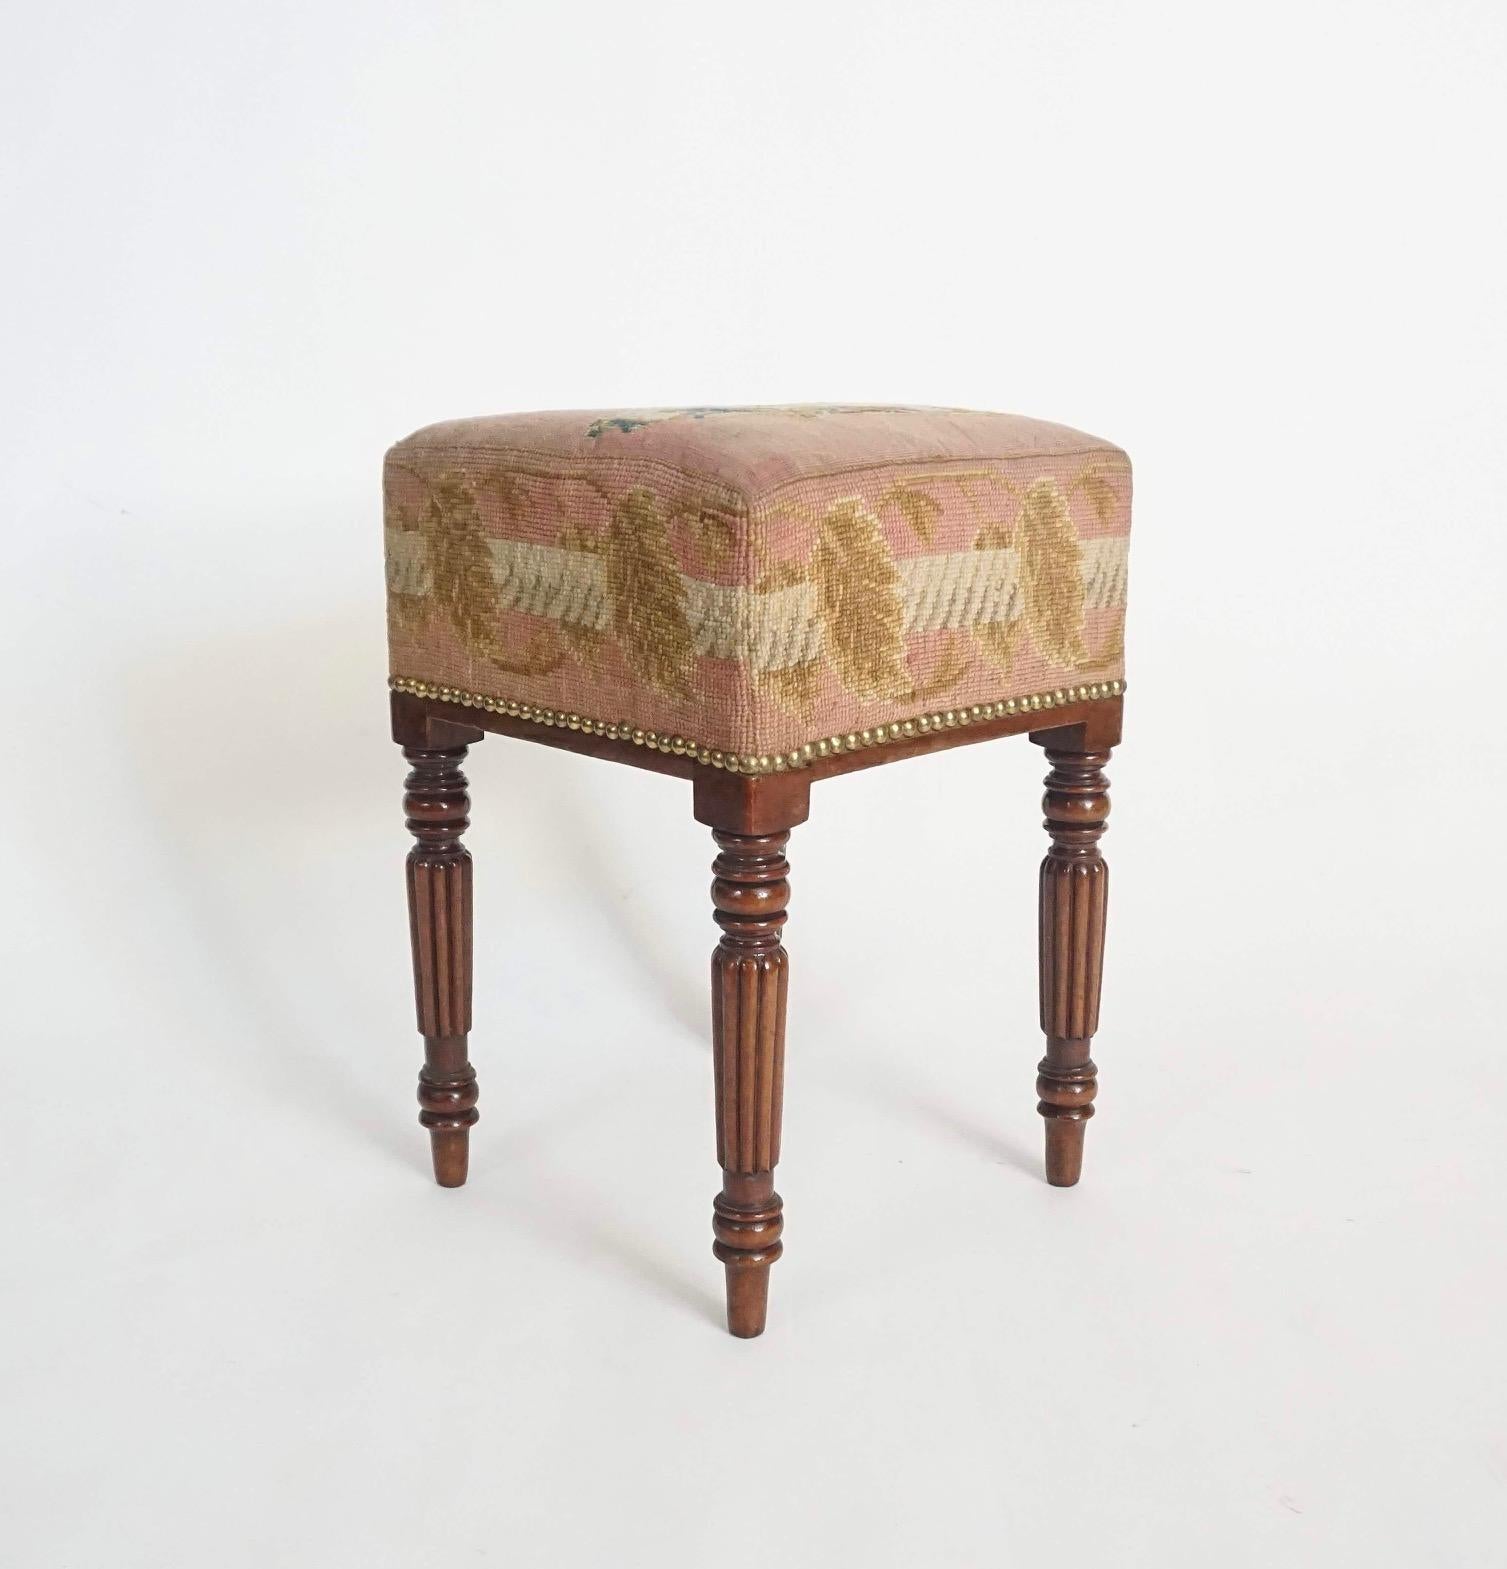 Looking quintessentially Mario Buatta is this wonderful circa 1820 English regency period mahogany stool having tall upholstered seat with original needlepoint or tapestry, the top depicting a spaniel carrying a letter in its mouth and all sides